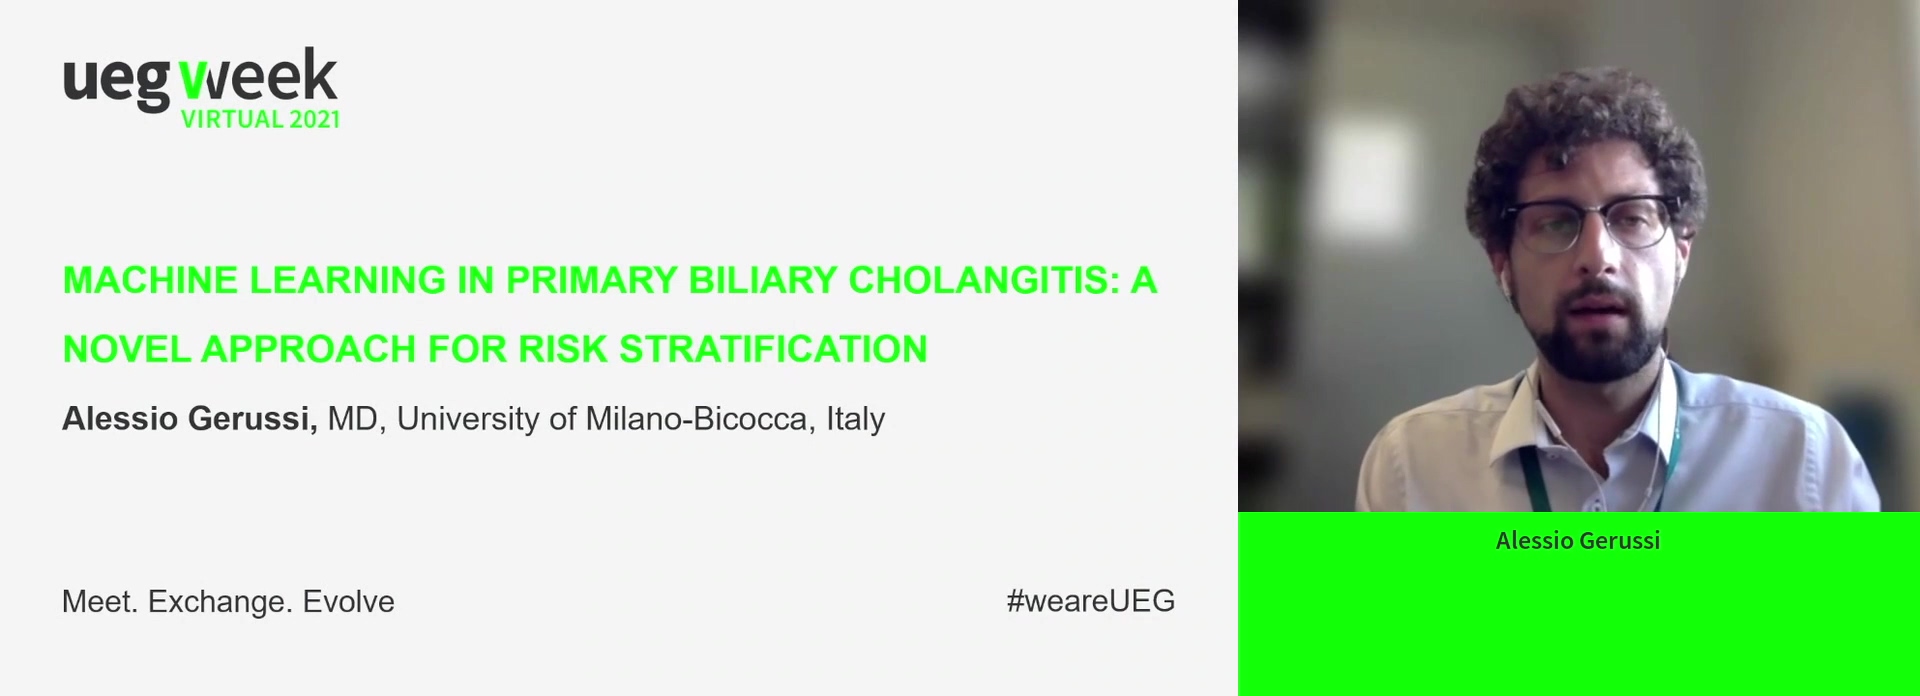 MACHINE LEARNING IN PRIMARY BILIARY CHOLANGITIS: A NOVEL APPROACH FOR RISK STRATIFICATION